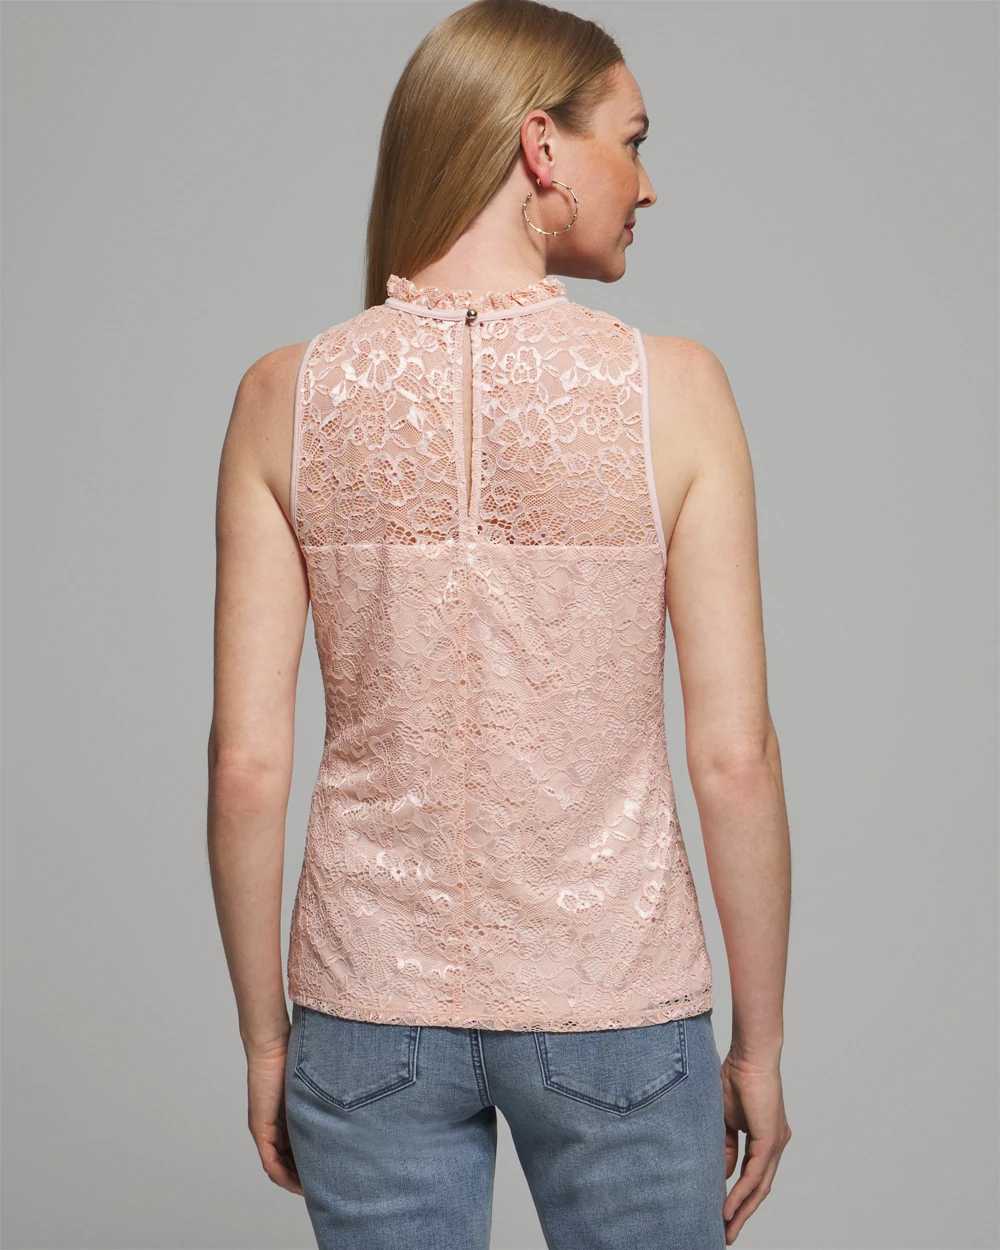 Outlet WHBM Sleeveless Lace Shell click to view larger image.